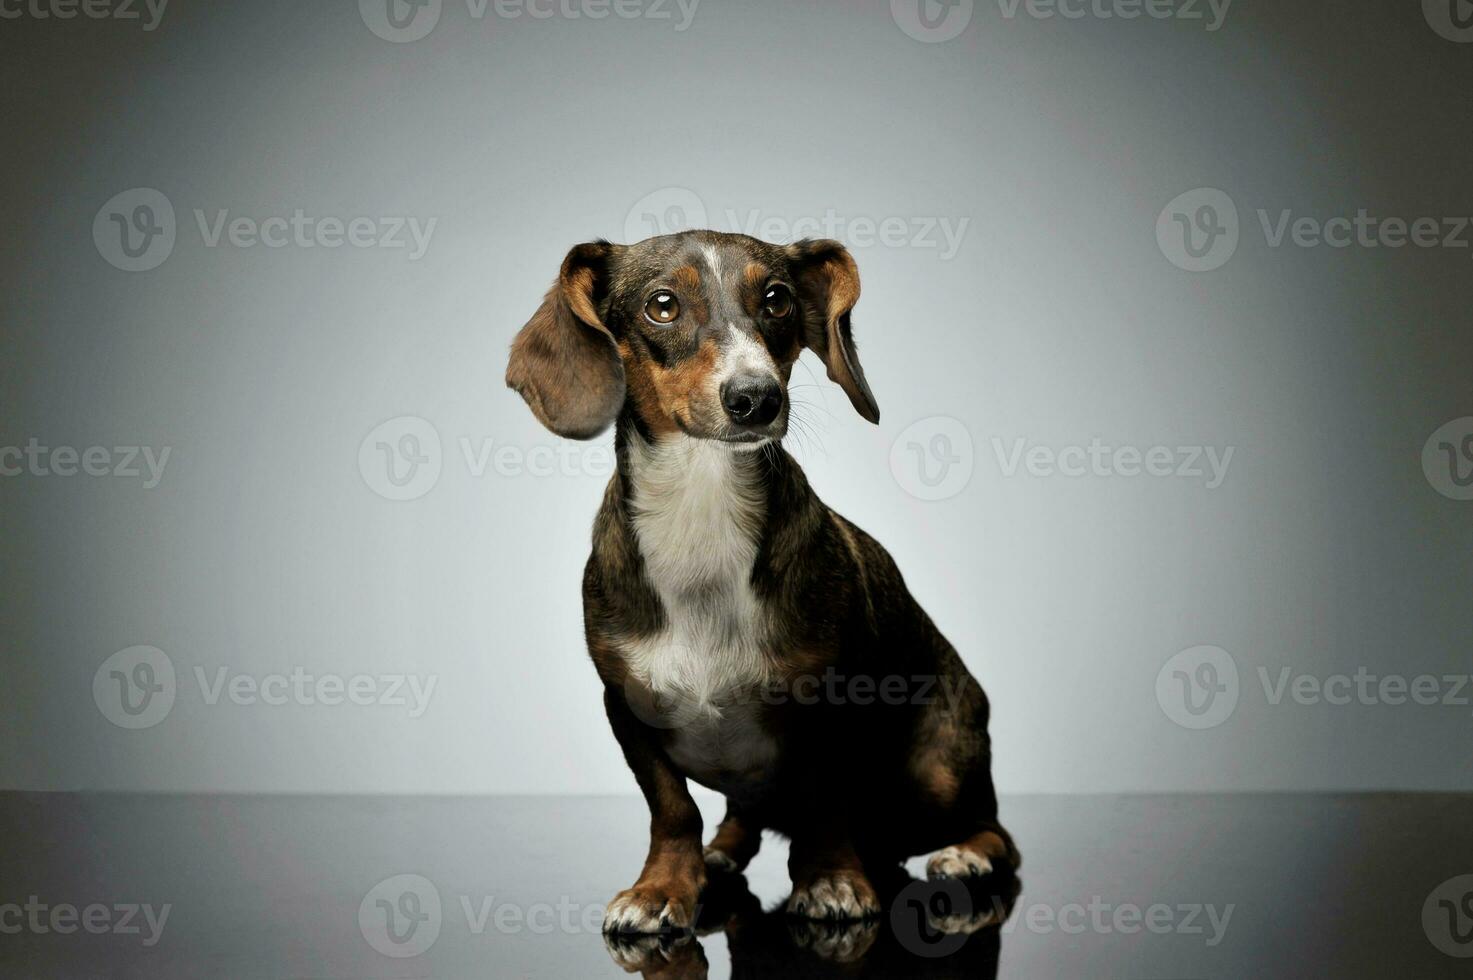 Studio shot of an adorable mixed breed dog with long ears looking curiously photo